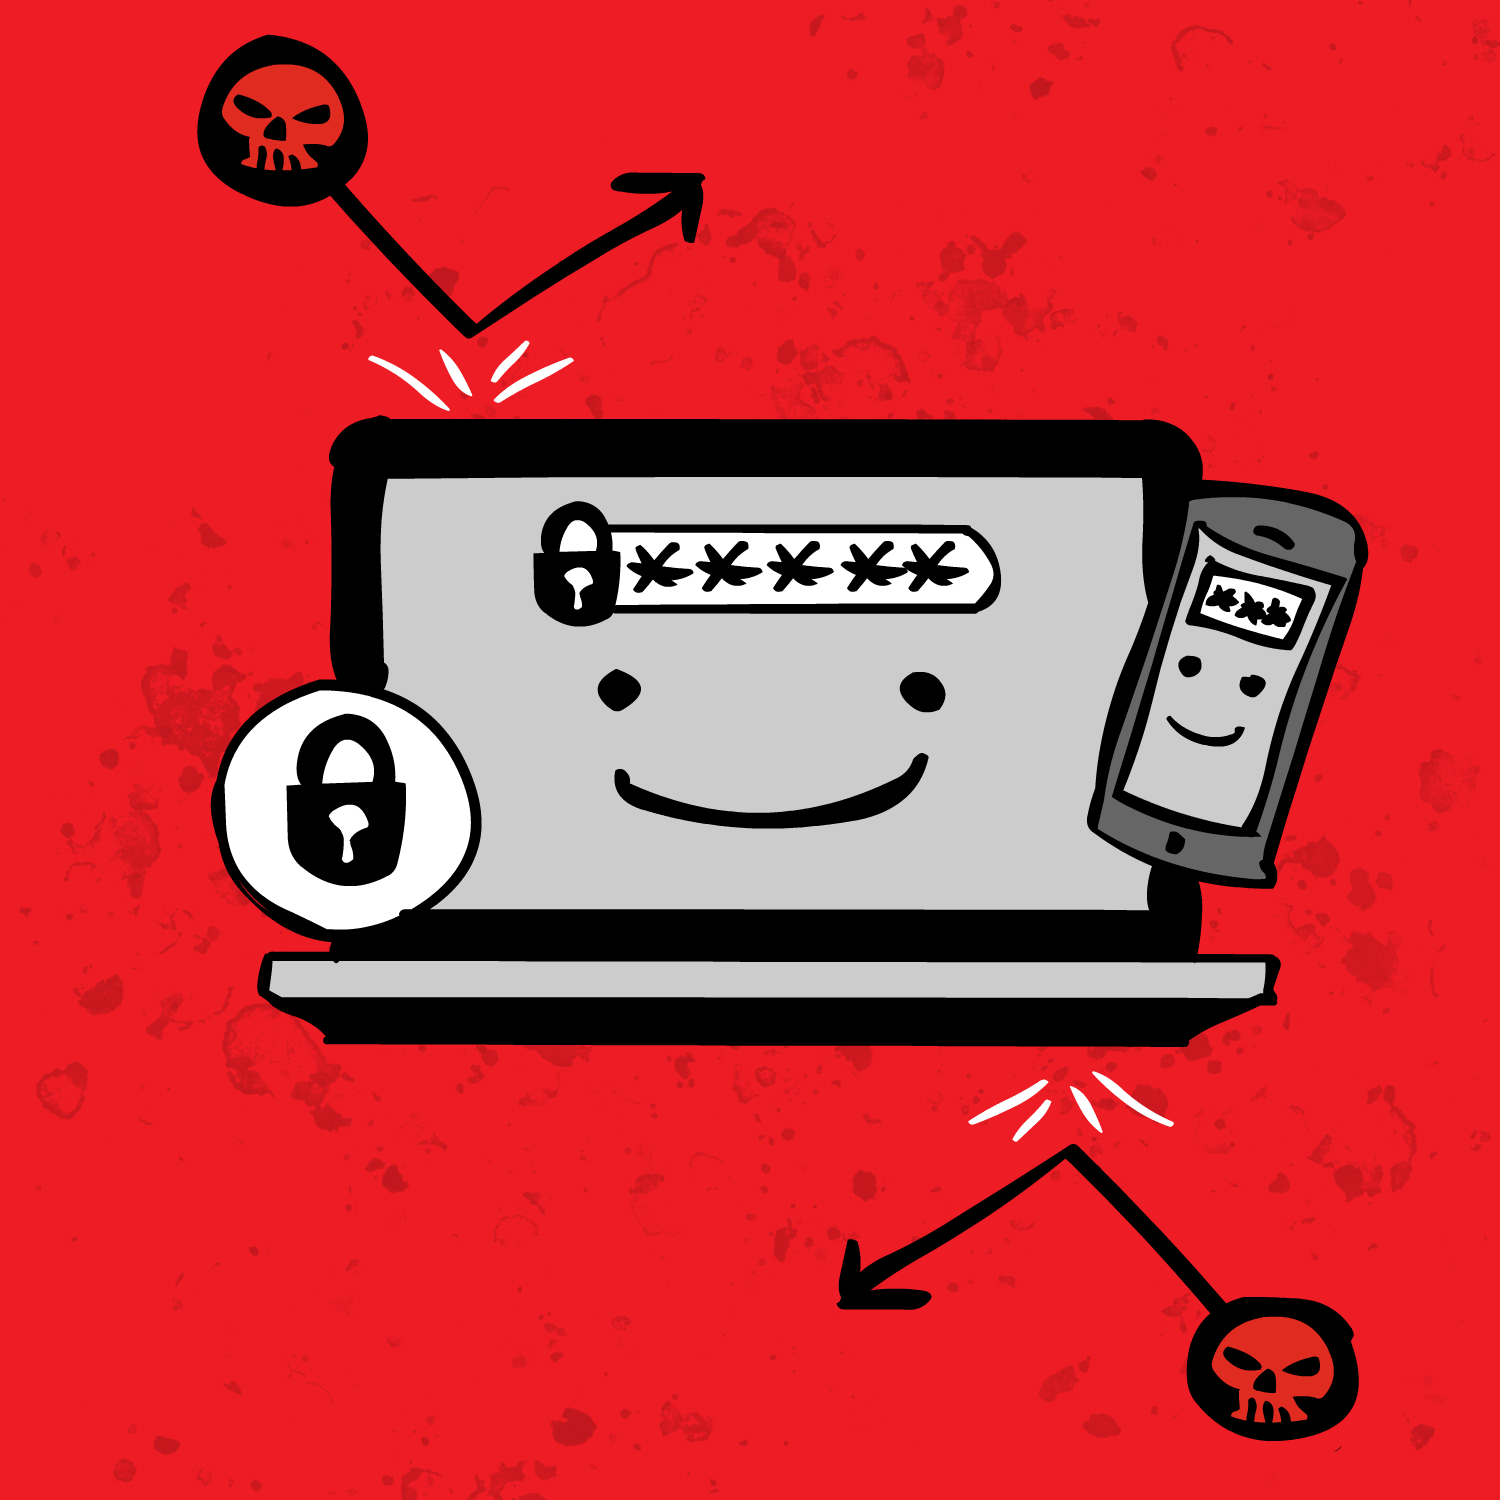 Use strong, unique passwords: Avoid using easily guessable passwords and use a combination of letters, numbers, and special characters. Use a password manager to securely store and manage your passwords.
Be mindful of social engineering: Be cautious of unsolicited phone calls, messages, or emails that request personal information or login credentials. Verify the legitimacy of the request through official channels before sharing any sensitive information.